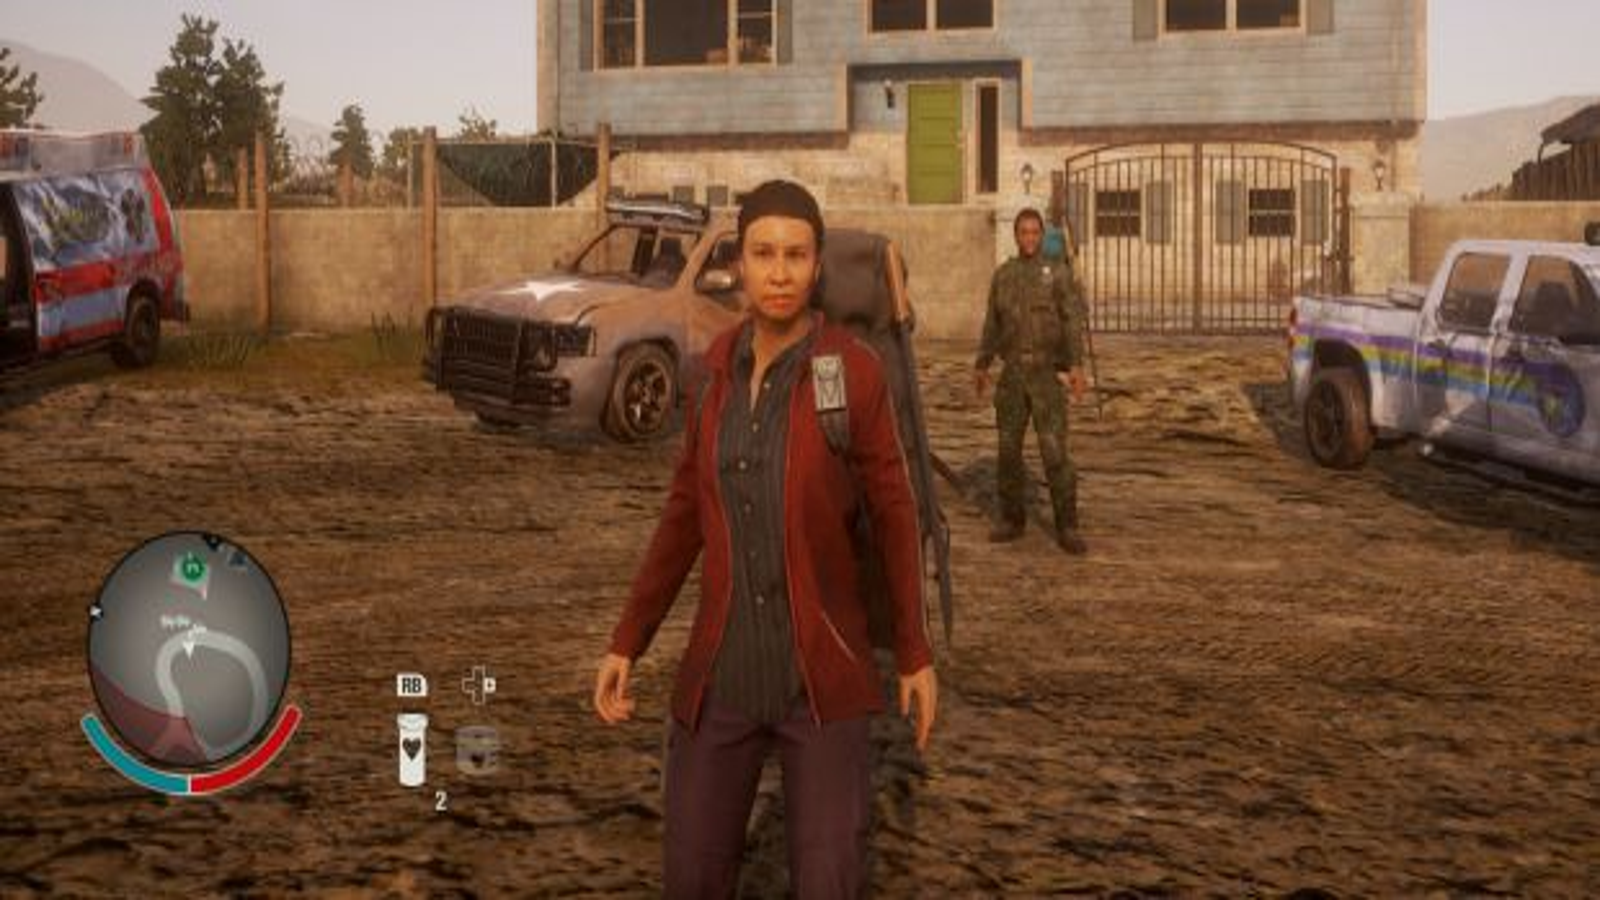 Review] State of Decay 2: Juggernaut Edition – Constant Warfare